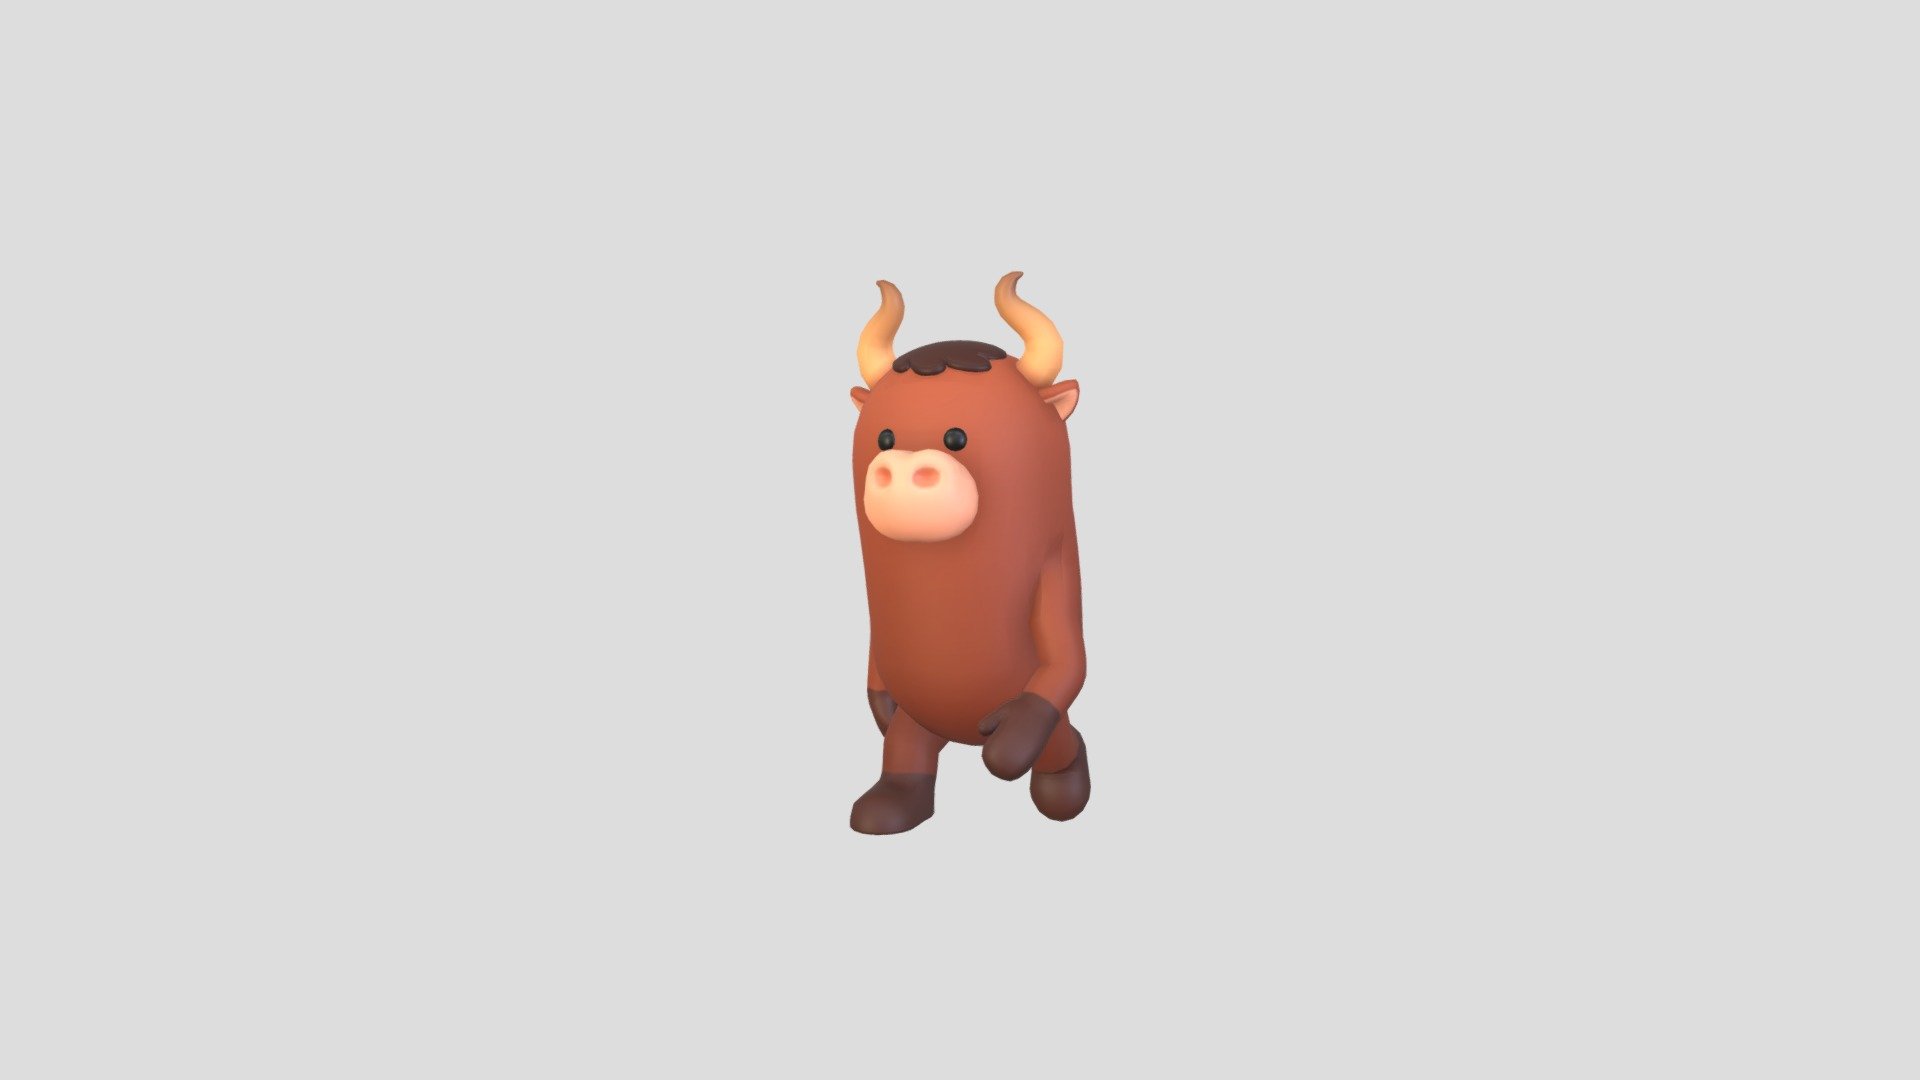 Rigged Bull Character  3d model.      
    


File Formats      
 
- 3ds max 2023 (Rigged With CAT)  
 
- FBX  (Rigged) 
 
- OBJ  (NoRig) 
    


Clean topology    

Body Rigged  

No Facial Rig  or Blendshapes 

No Animations  

Non-overlapping unwrapped UVs        
 


PNG texture               

2048x2048                


- Base Color                        

- Normal                            

- Roughness                         



2,900 polygons                          

3,002 vertexs                          
 - Rigged Bull Character - Buy Royalty Free 3D model by bariacg 3d model